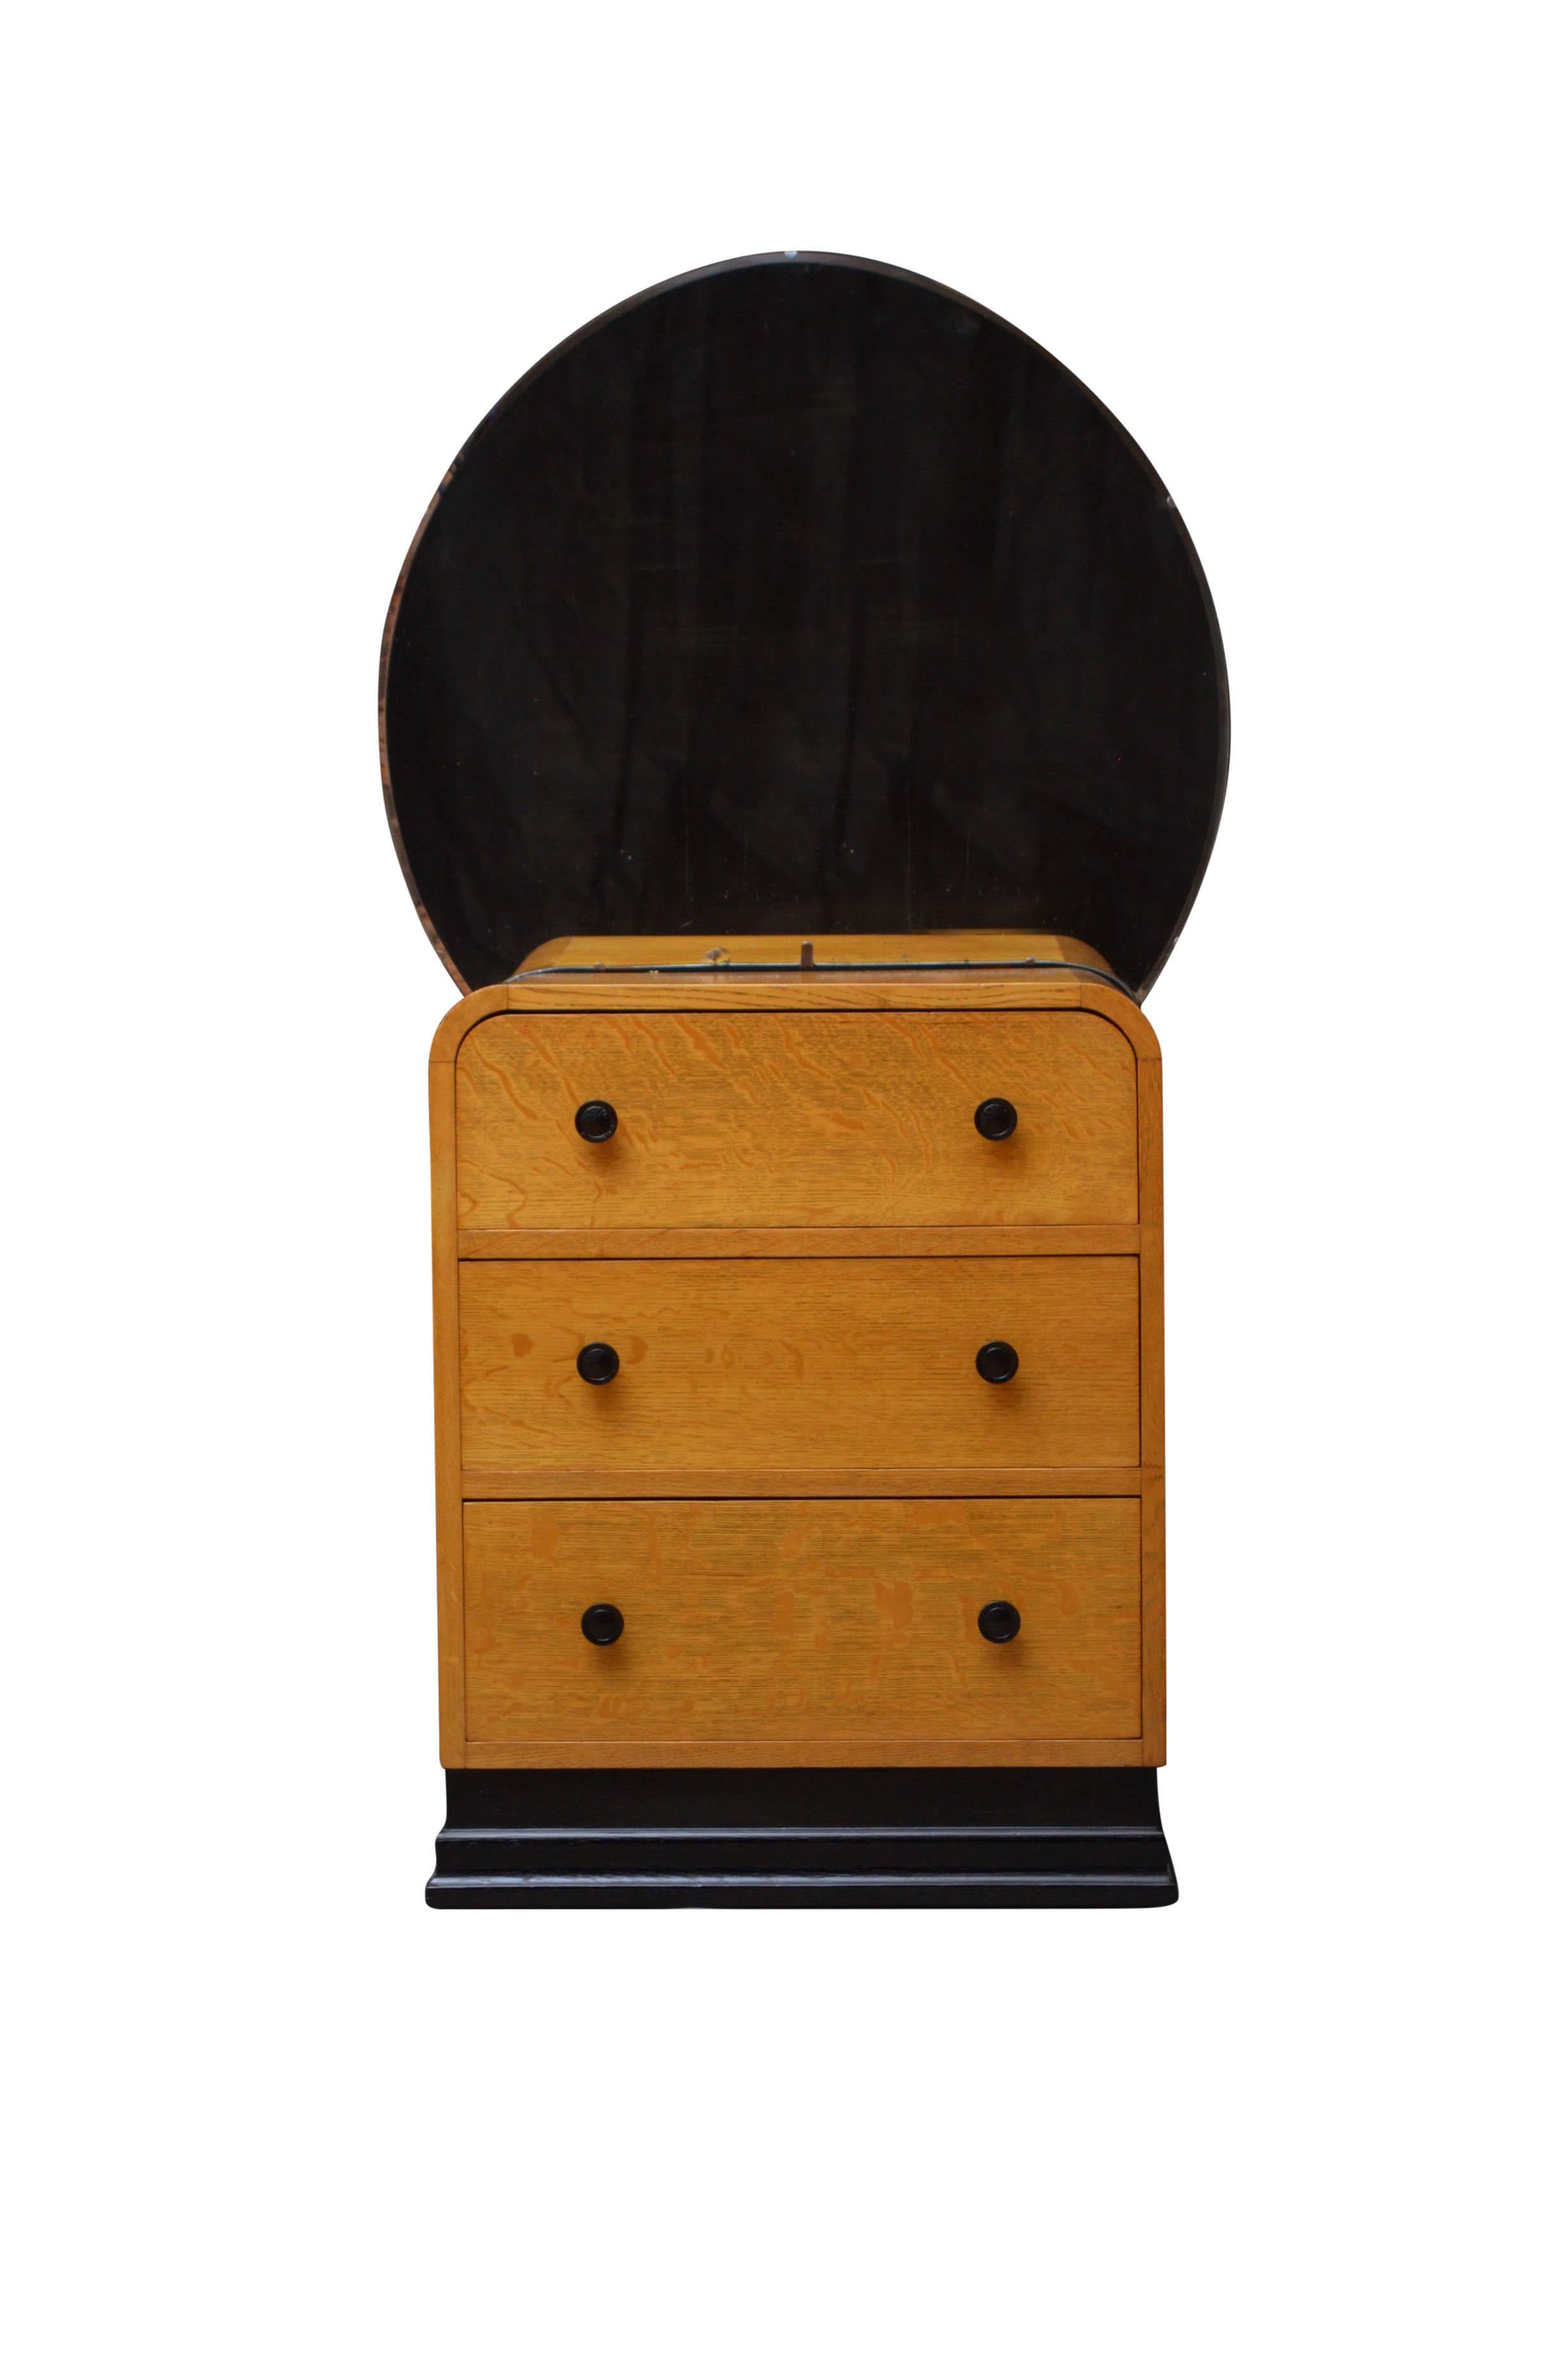 K0441, very attractive Art Deco dressing chest in oak, having original beveled mirror (small chip at the bottom) over rounded corners chest fitted with graduated drawers and ebonized handles, all standing on ebonized plinth base. This Art Deco chest